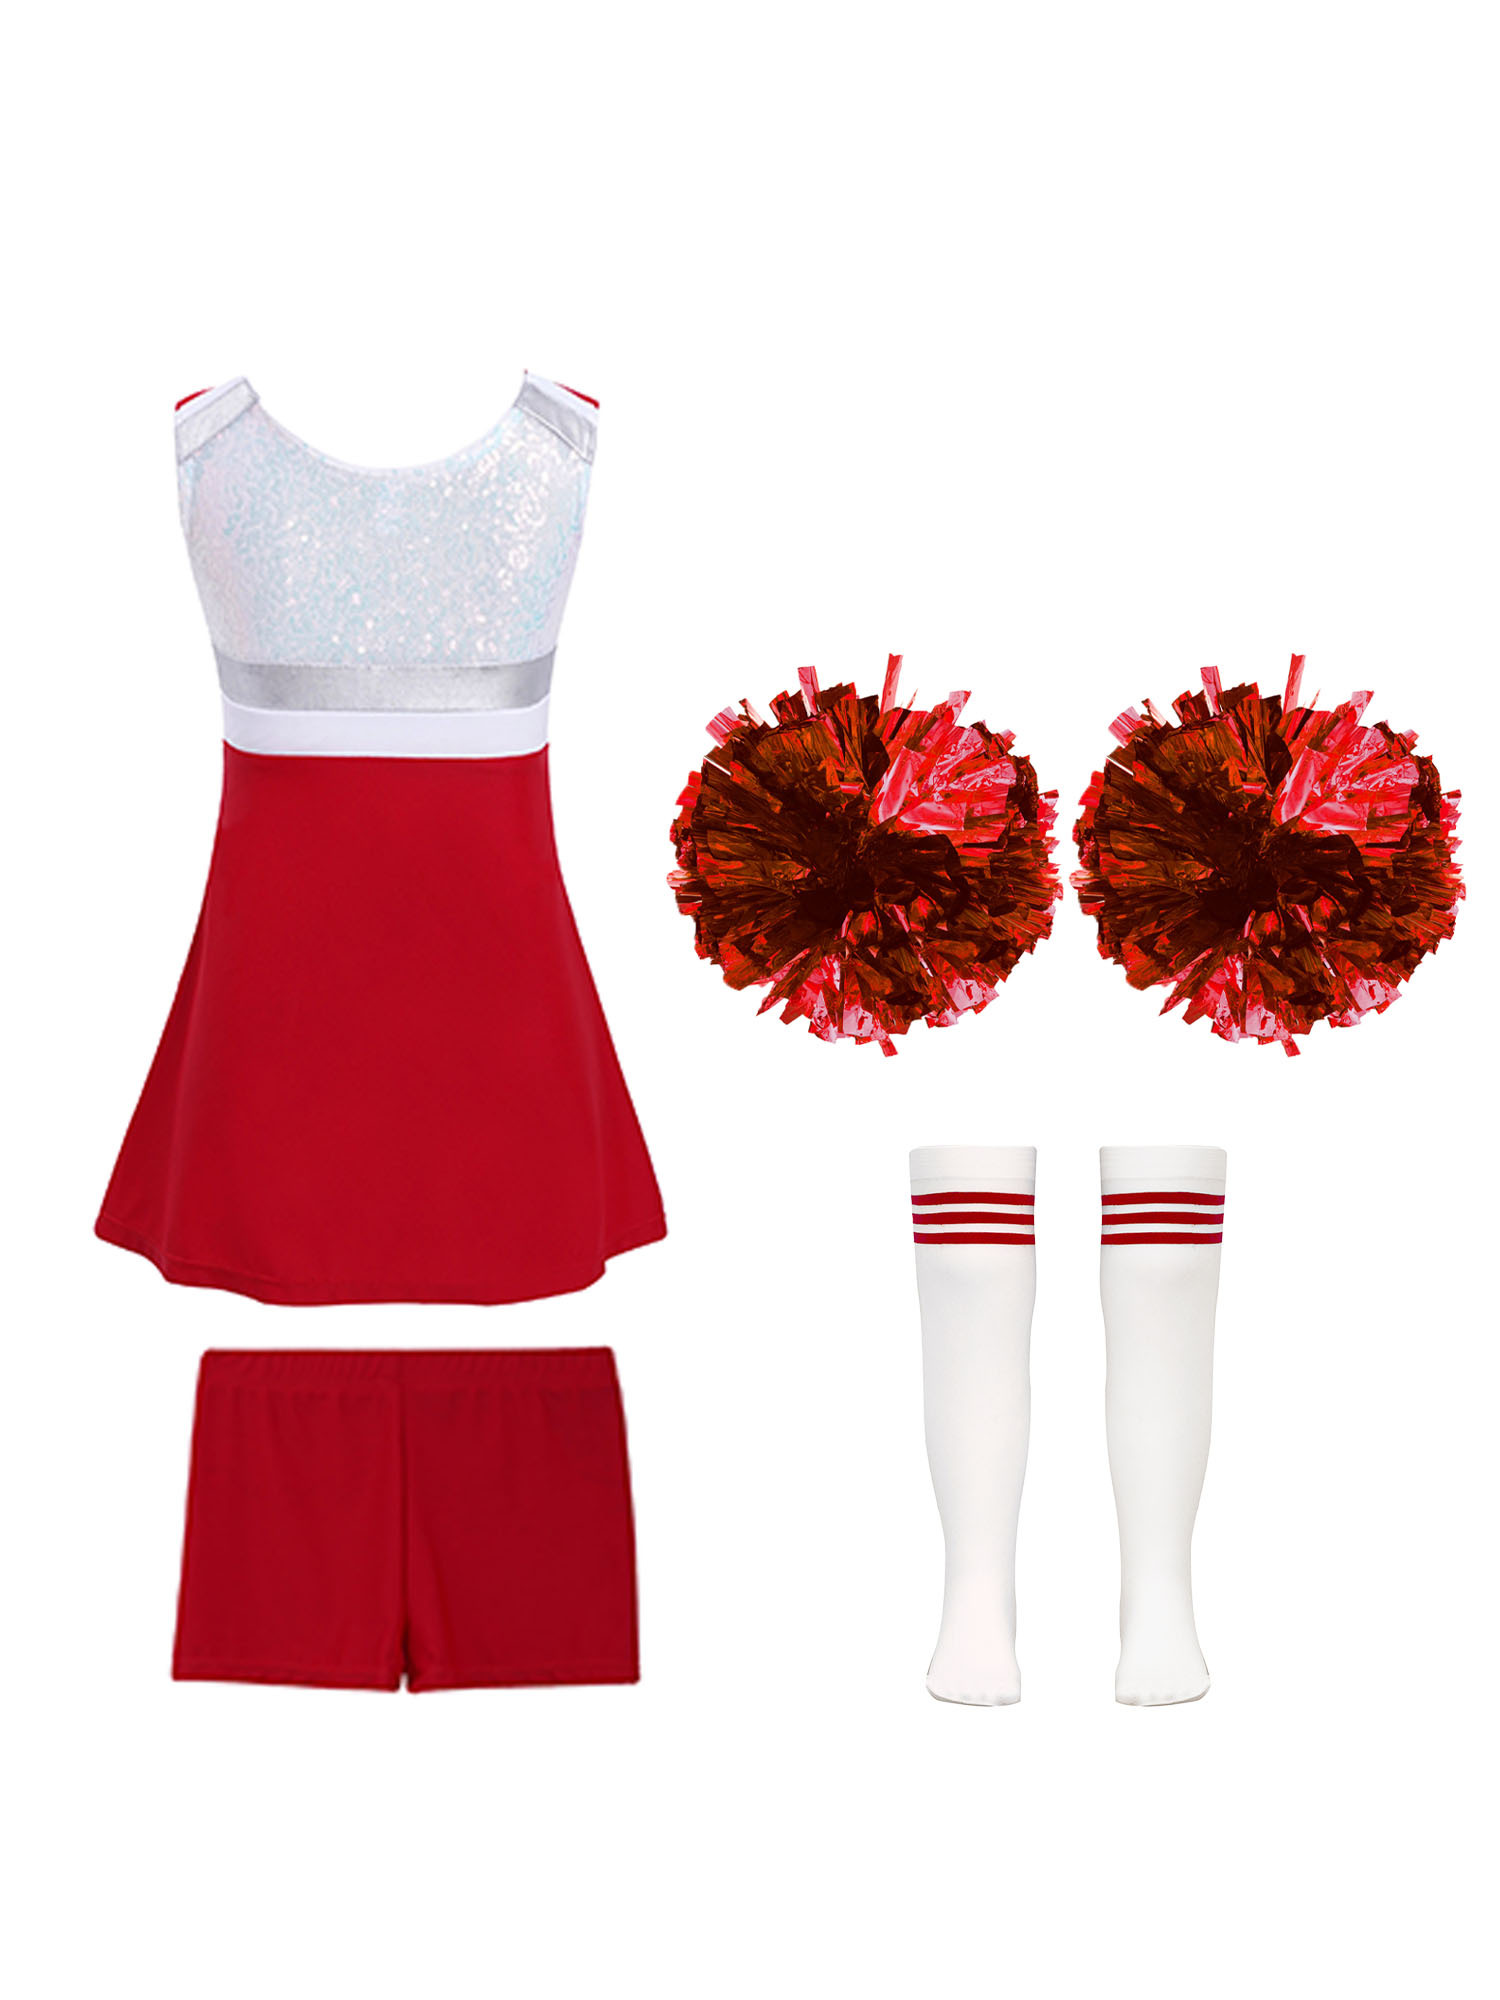 TiaoBug Kids Girls Cheer Leader Uniform Sports Games Cheerleading Dance Outfits Halloween Carnival Fancy Dress Up A Red-A 14 - image 2 of 5